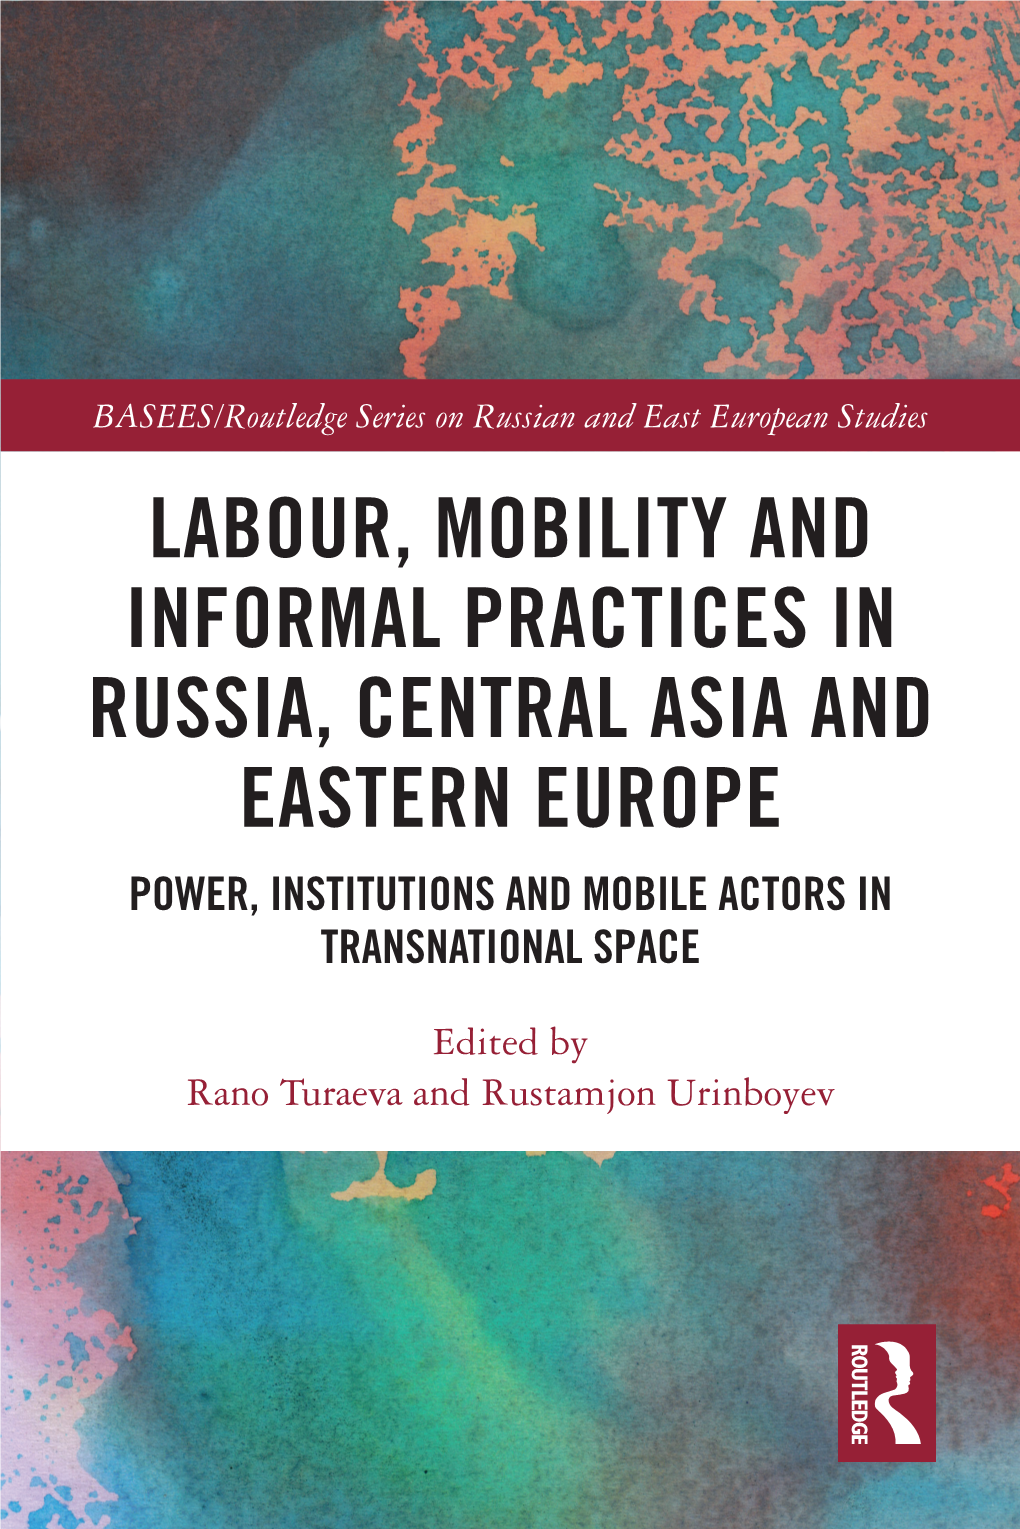 Labour, Mobility and Informal Practices in Russia, Central Asia and Eastern Europe Power, Institutions and Mobile Actors in Transnational Space